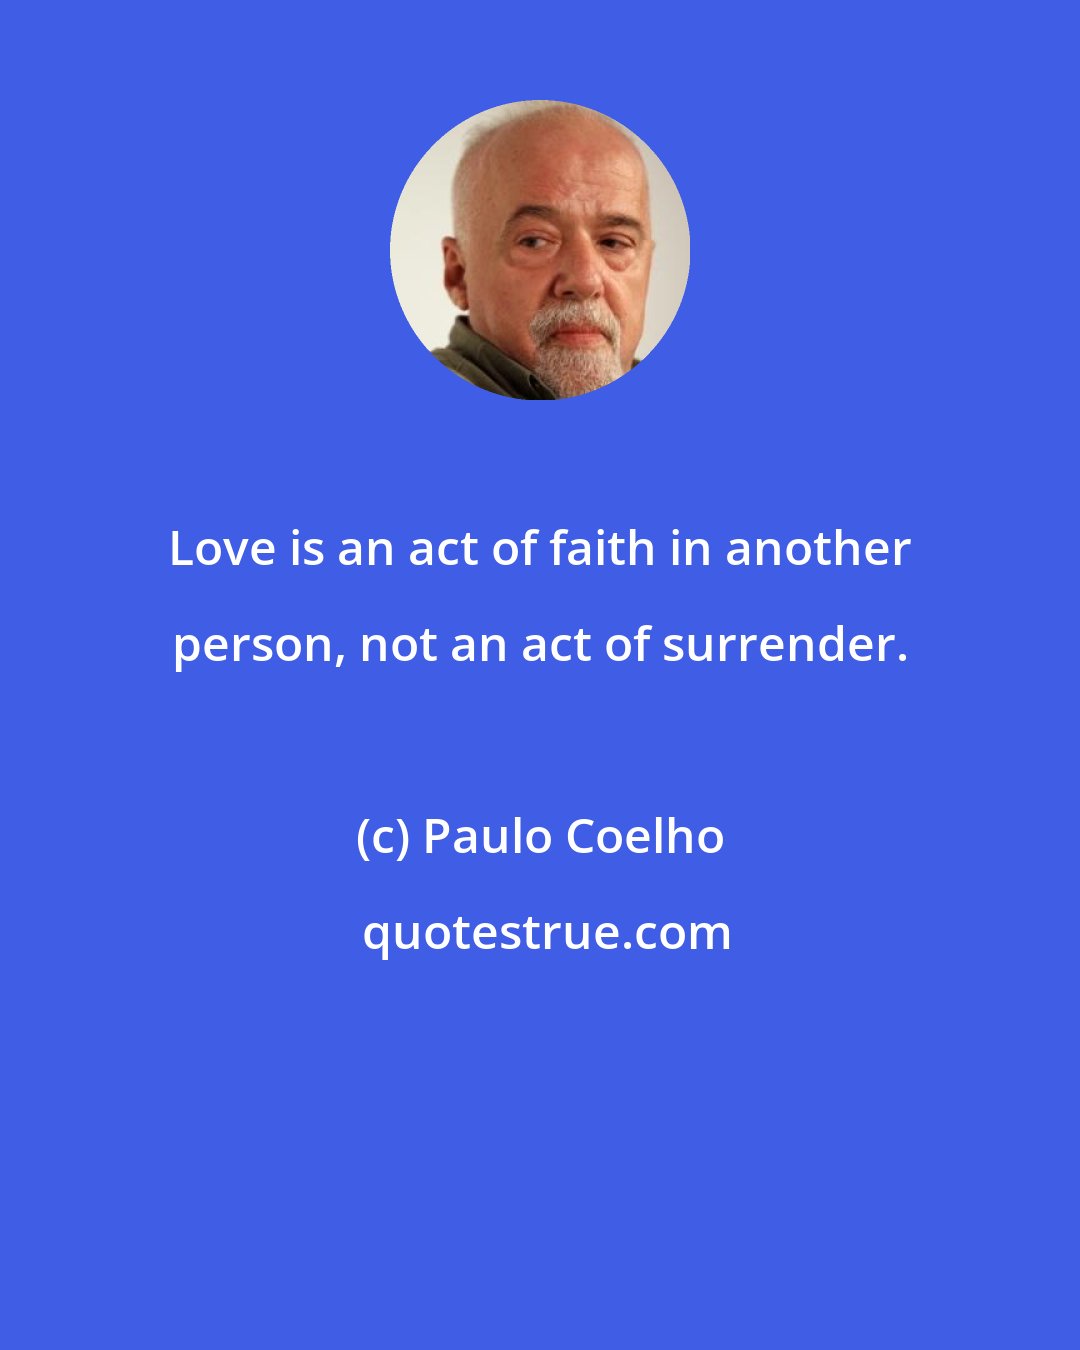 Paulo Coelho: Love is an act of faith in another person, not an act of surrender.